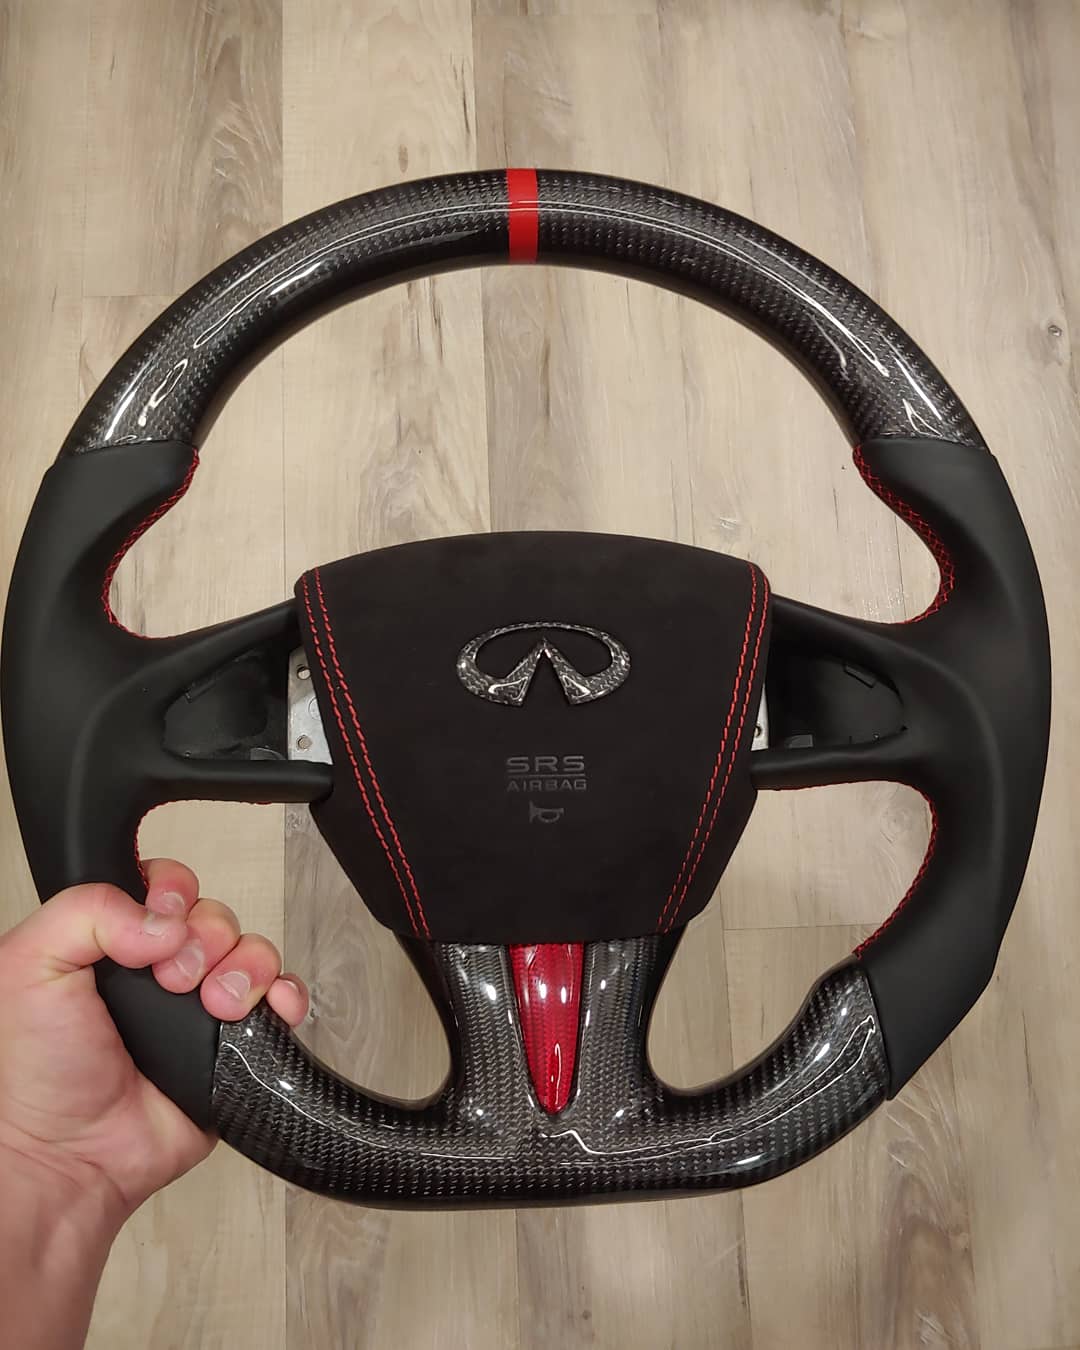 Traditional CarbonFiber Steering Wheel design with standard thumb holders, a red accent, red stitching, and a central red stripe for Infiniti Q50 2014-2017.